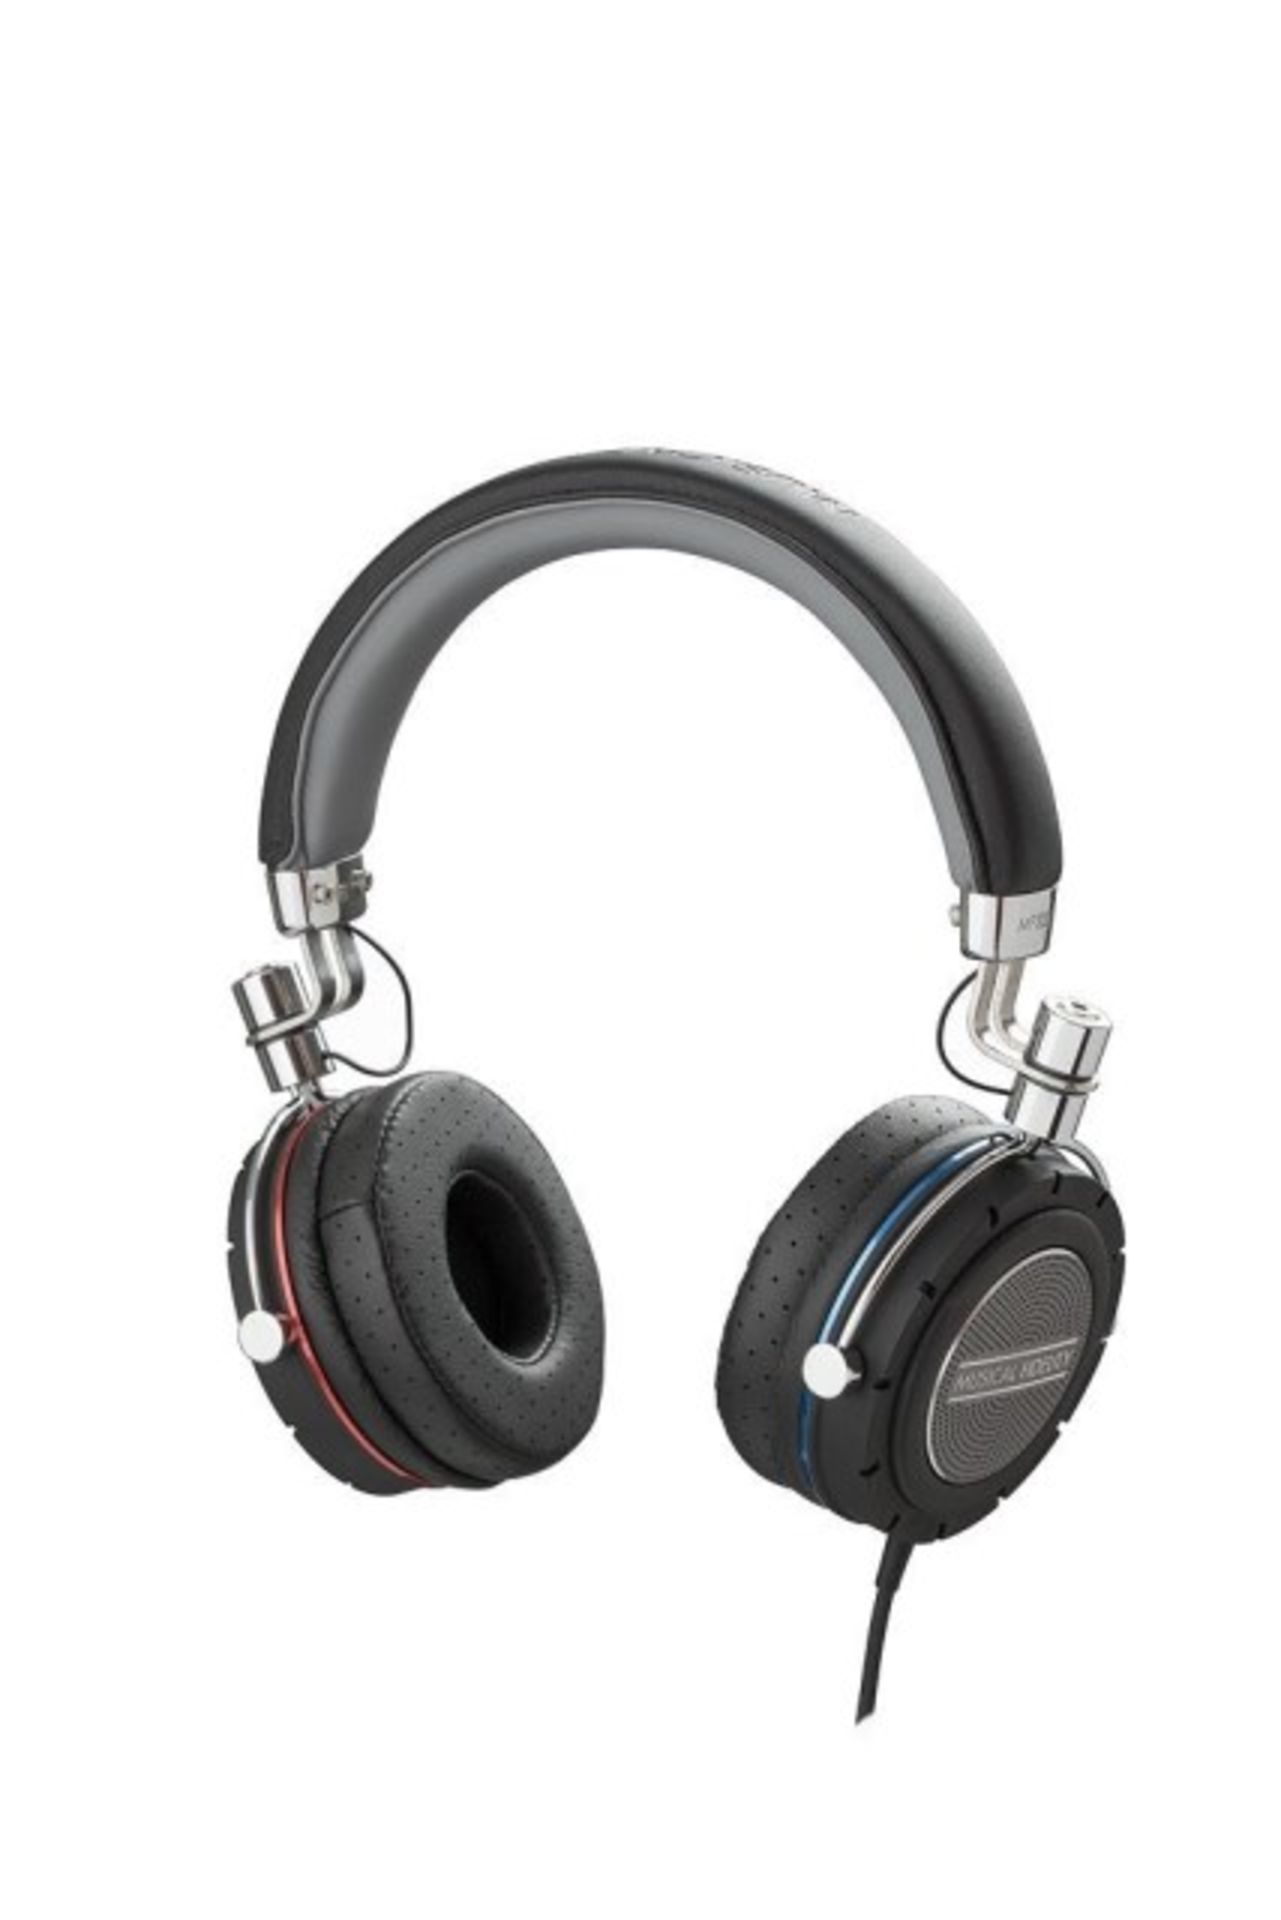 V *TRADE QTY* Brand New Musical Fidelity MF-200 Headphones (Brand New & Sealed) RRP £249 X 4 YOUR